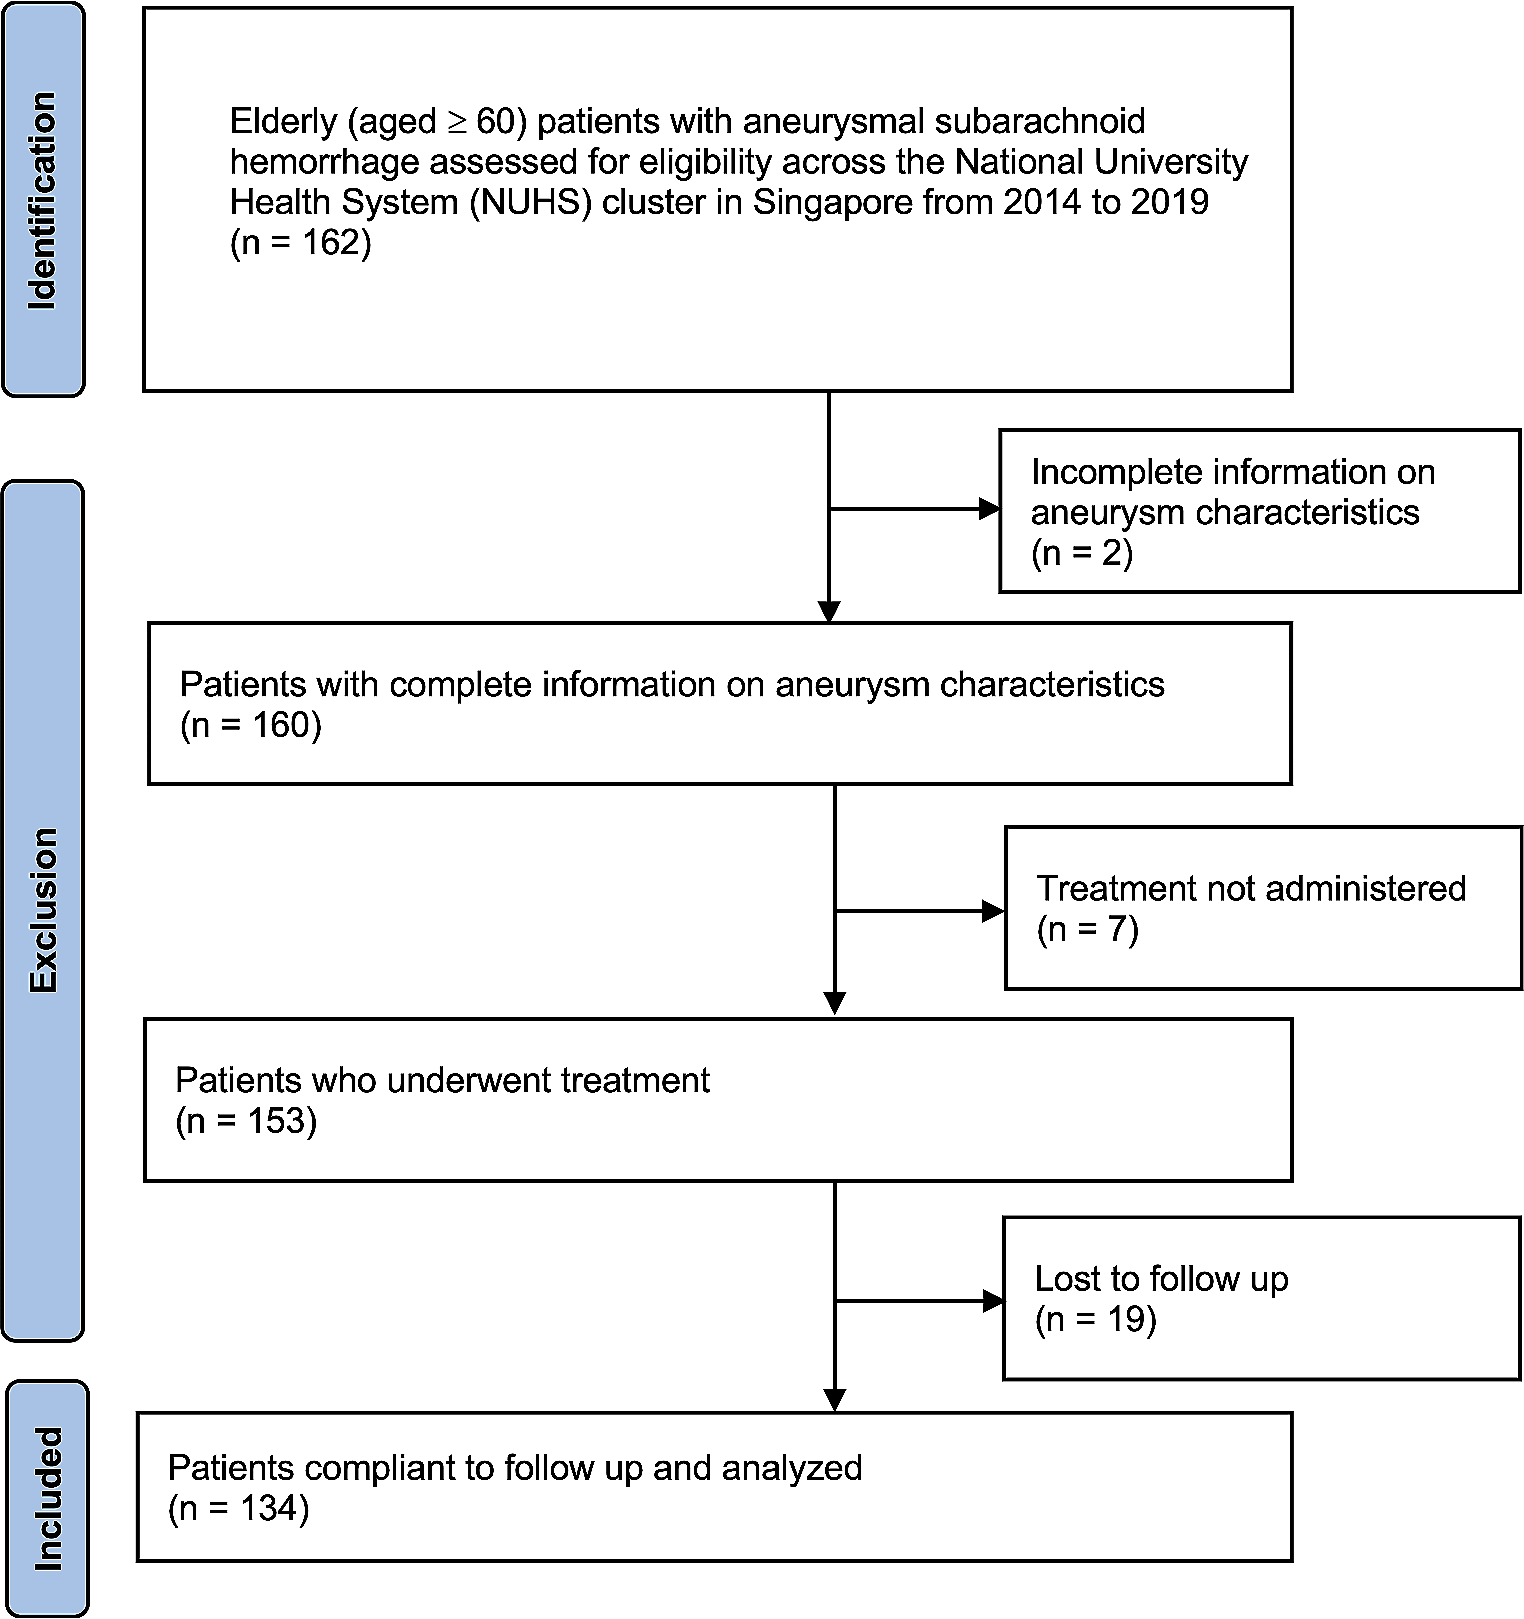 Endovascular coiling versus neurosurgical clipping in the management of aneurysmal subarachnoid haemorrhage in the elderly: a multicenter cohort study